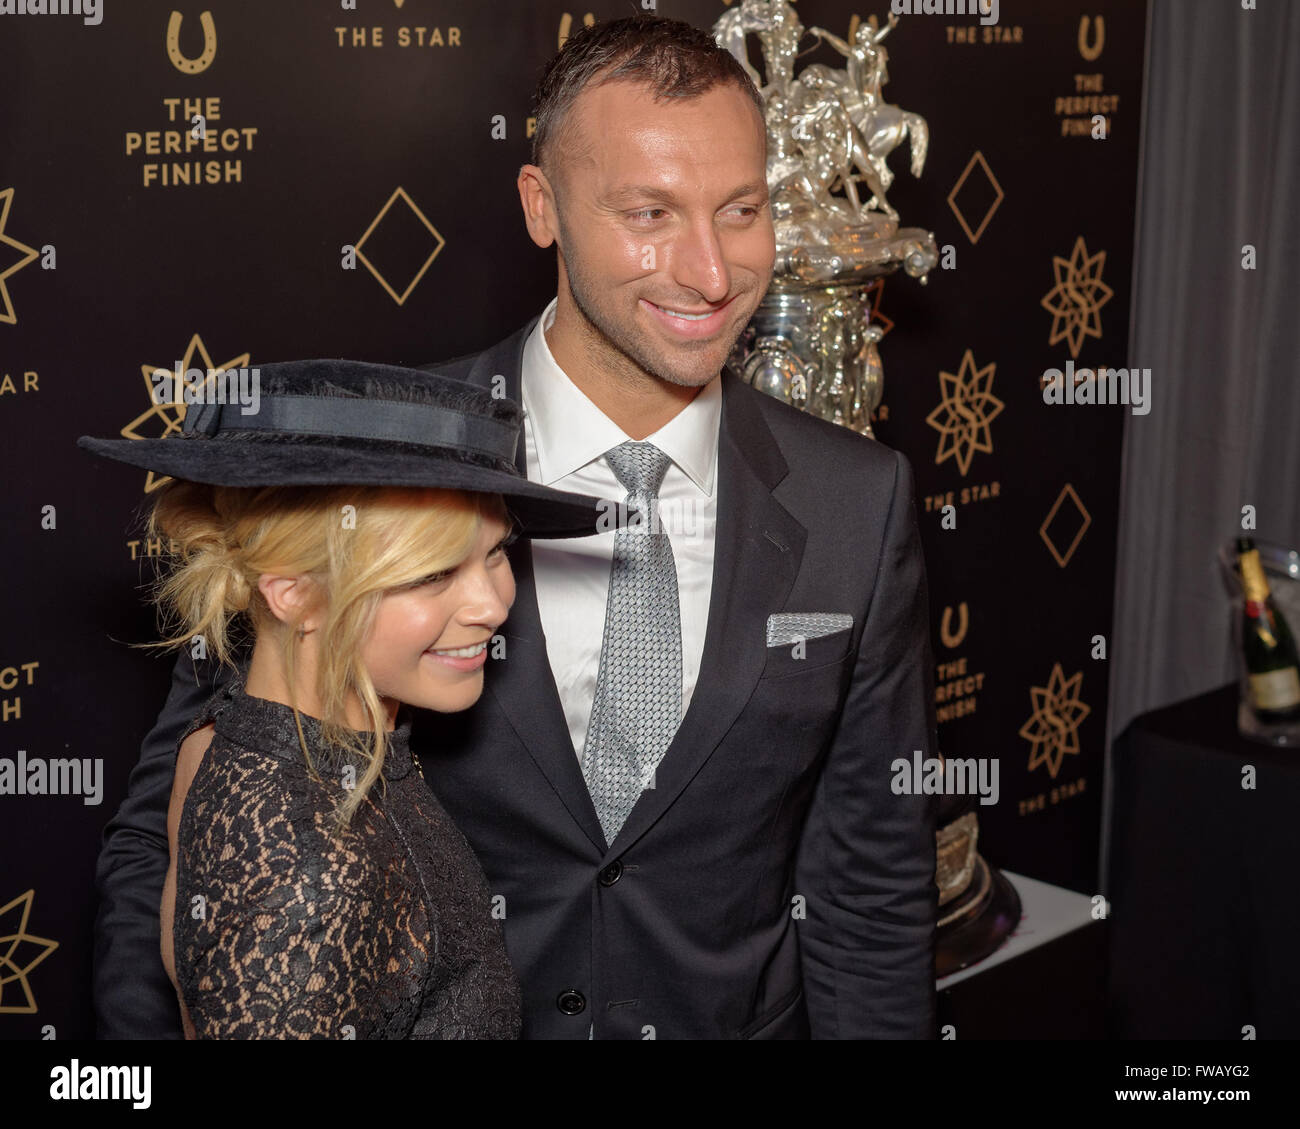 Sydney, Australia. 02nd Apr, 2016. Gold medal Olympic swimmer Ian Thorpe and Emma Freedman poses next to the Championships racing trophy during a photo call during The Championships Day at Royal Randwick features the world's richest horse races in Sydney, Australia. Ian Thorpe revealed he was gay in an interview with Sir Michael Parkinson in 2014. © Hugh Peterswald/Pacific Press/Alamy Live News Stock Photo